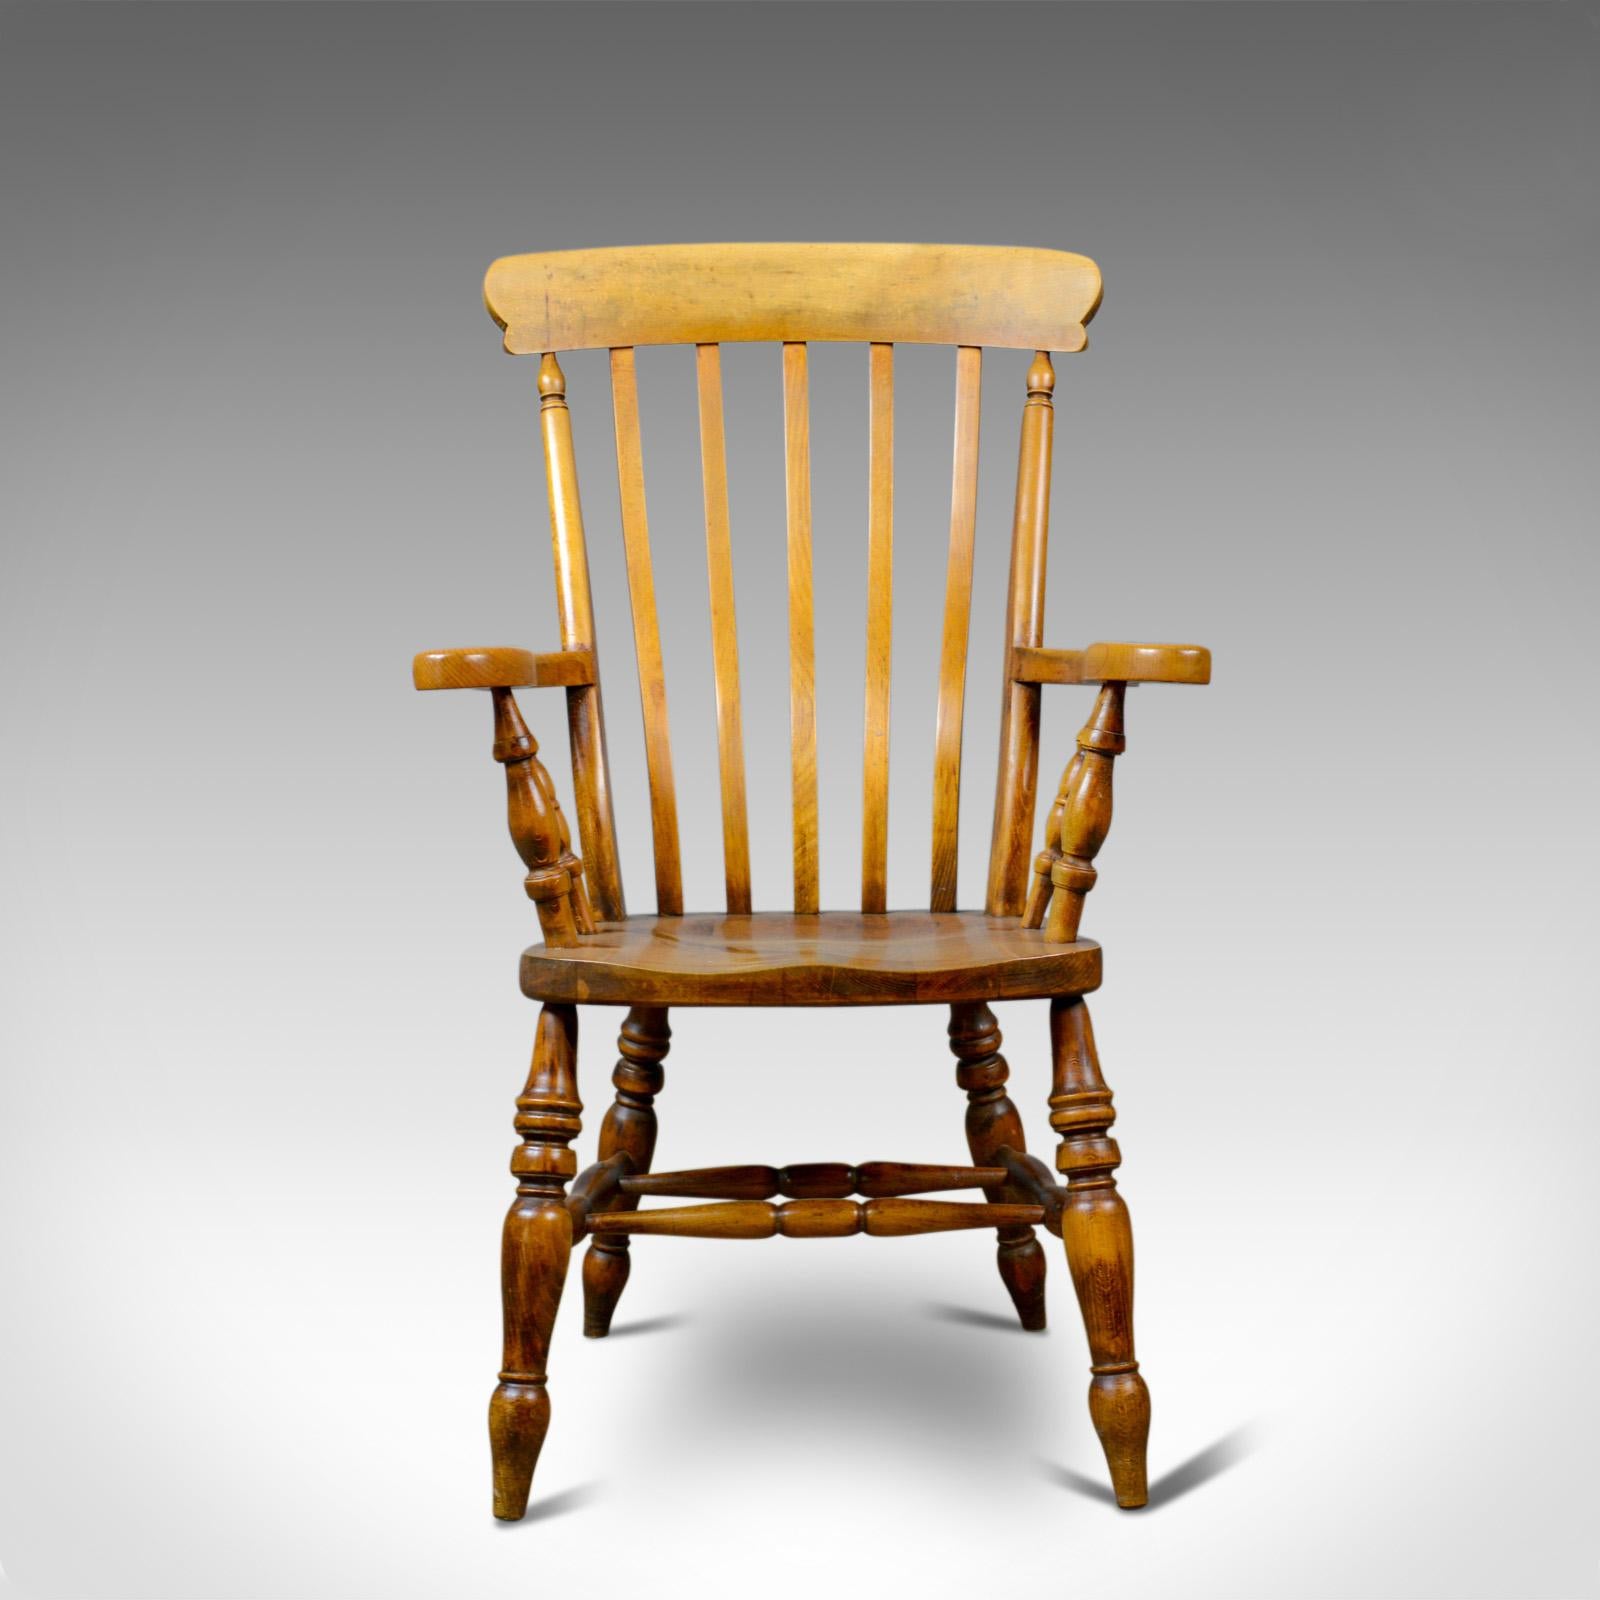 This is an antique elbow chair. An English, country kitchen, Windsor, lath back, armchair in beech, dating to the early 20th century.

Super chair in fine order throughout
Classic, lath back design offering a comfortable seat
Good color and a